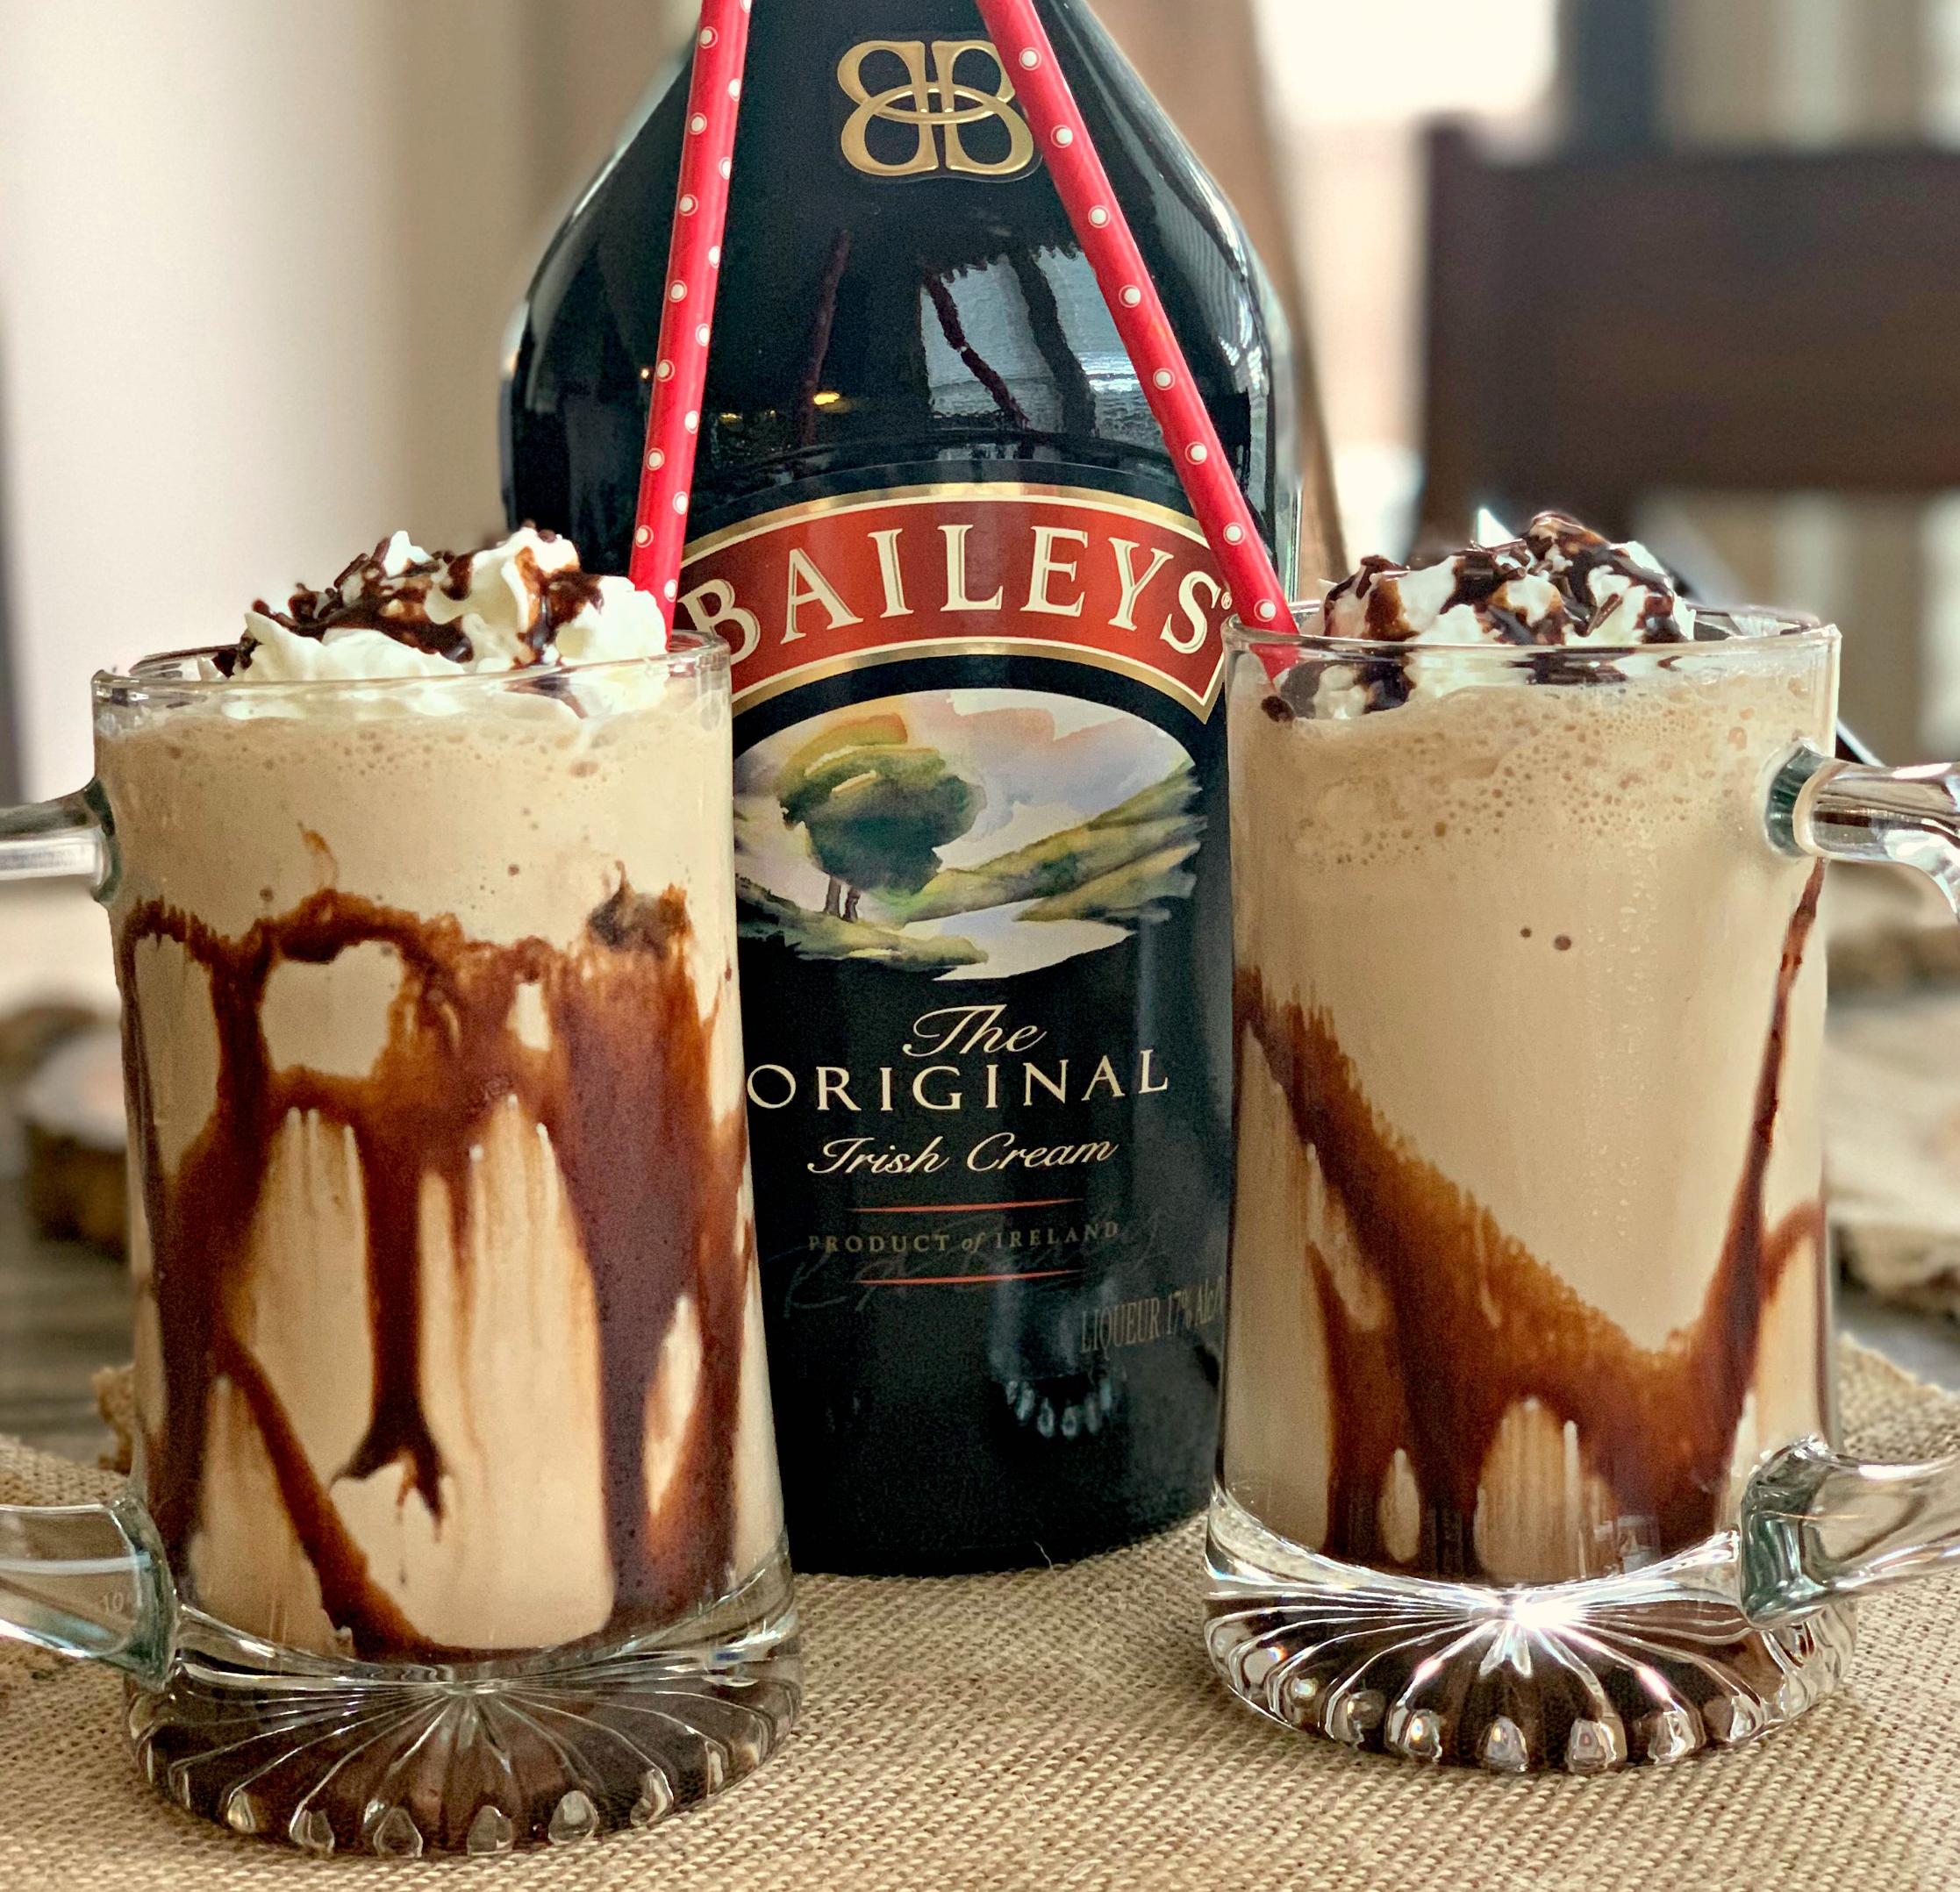  An irresistible blend of coffee, ice, and Baileys